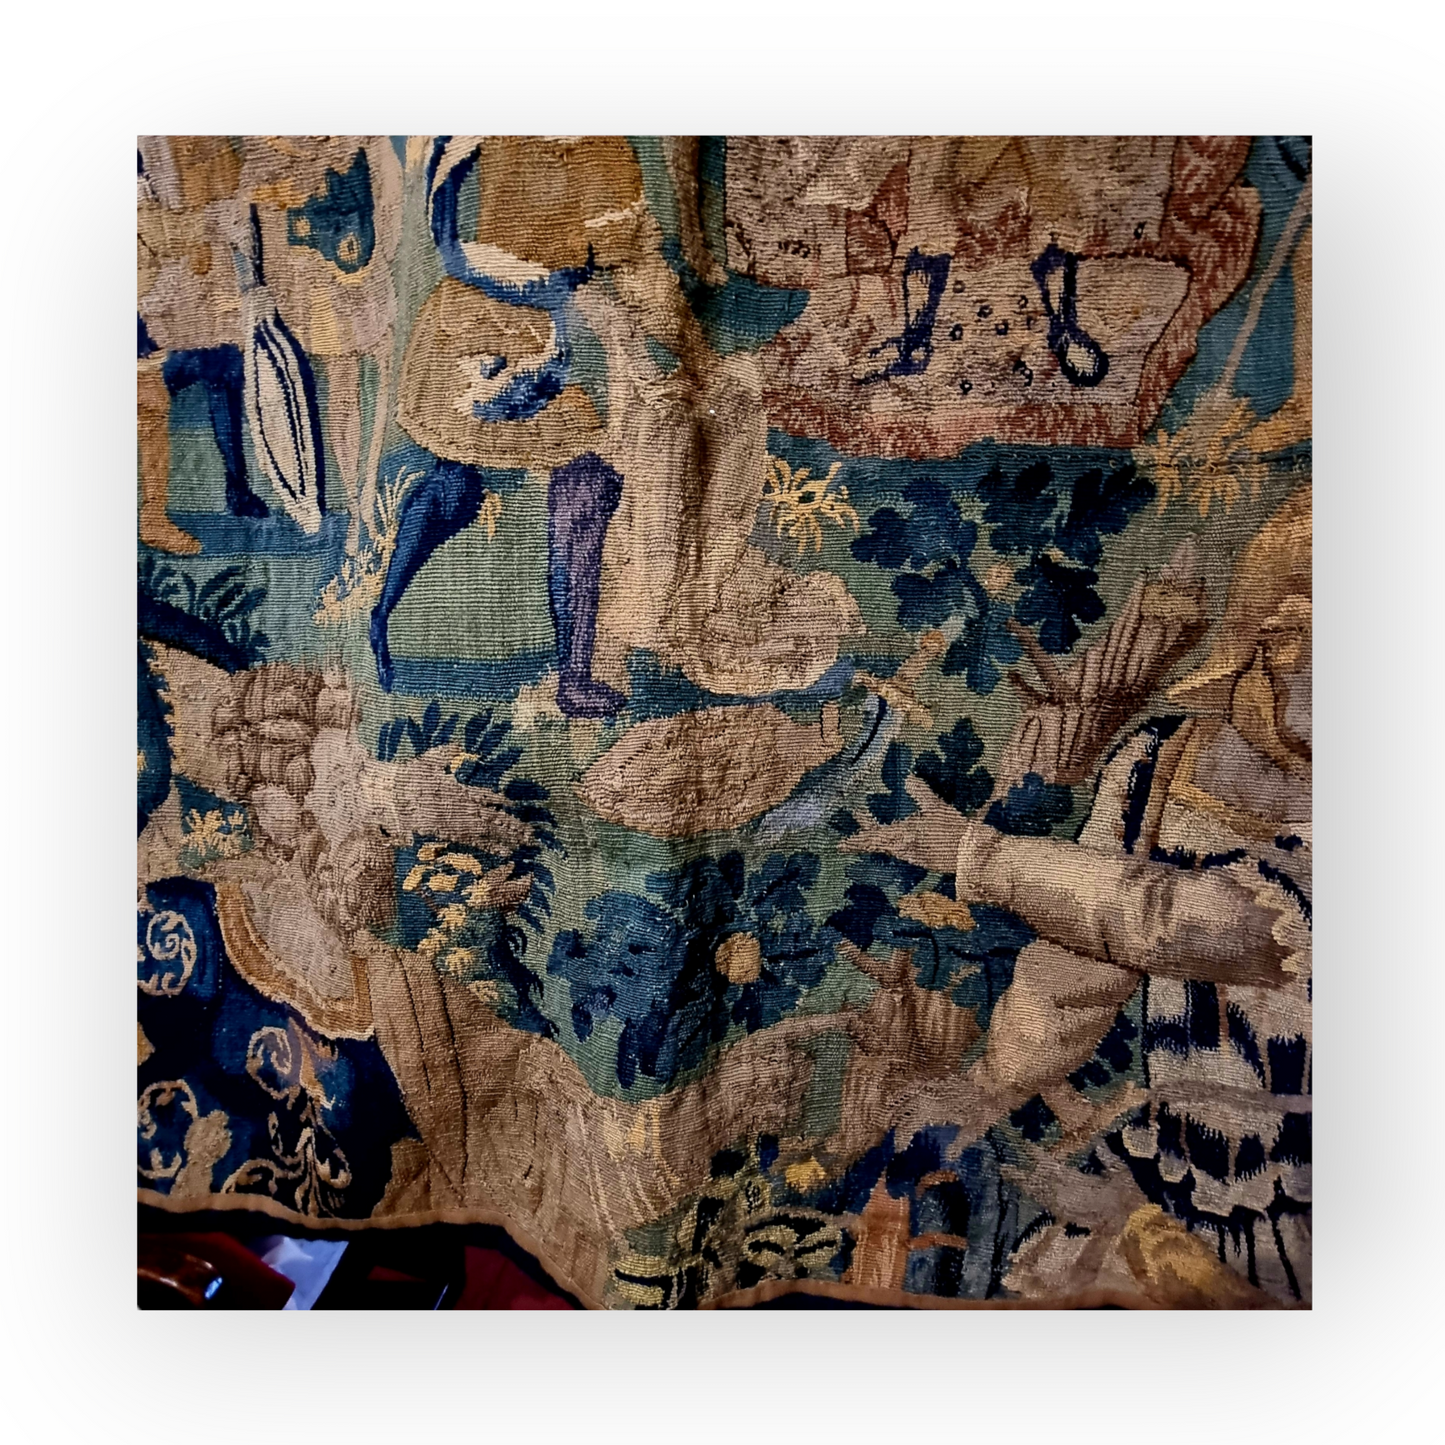 A Large Late 16th Century Flemish Antique Verdure Tapestry Fragment Depicting Soldiers and Cavalry